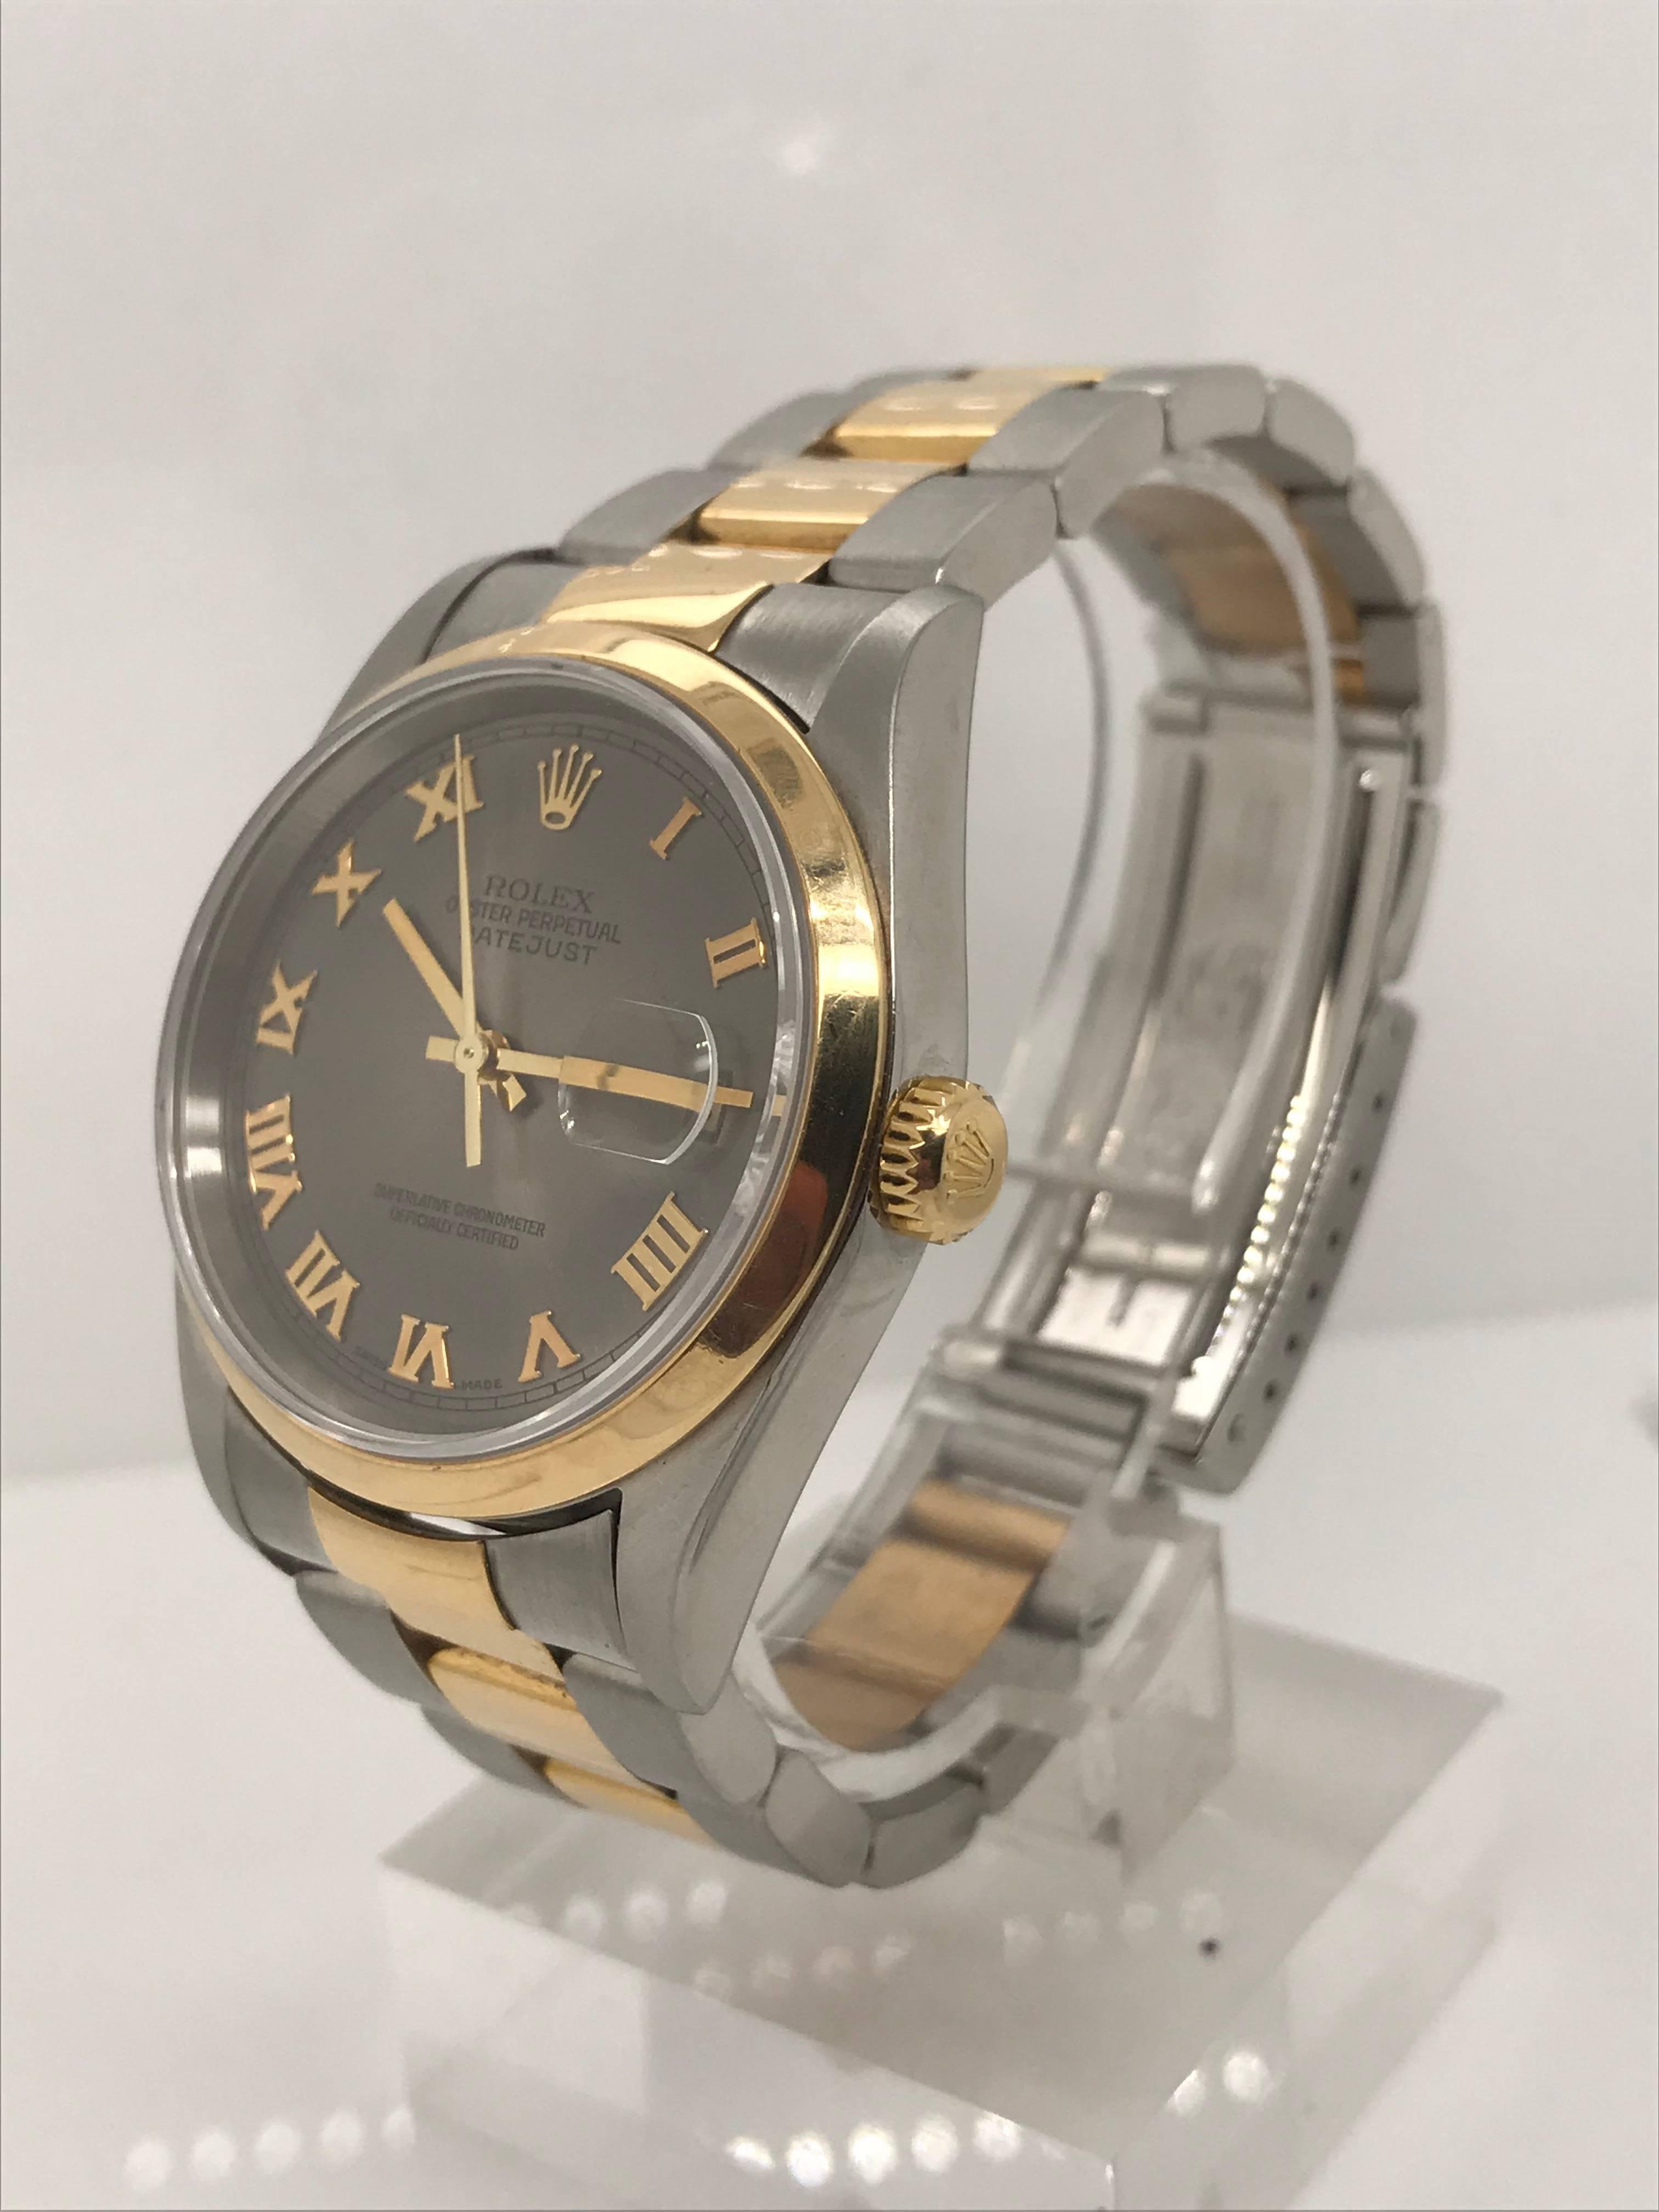 This two-tone, 18kt yellow gold and Stainless Steel Rolex Datejust features a unique slate gray dial with golden Roman Numeral markers. This watch is on an Oyster link 18kt and Stainless steel link style bracelet. Circa 2003. This timepiece has been